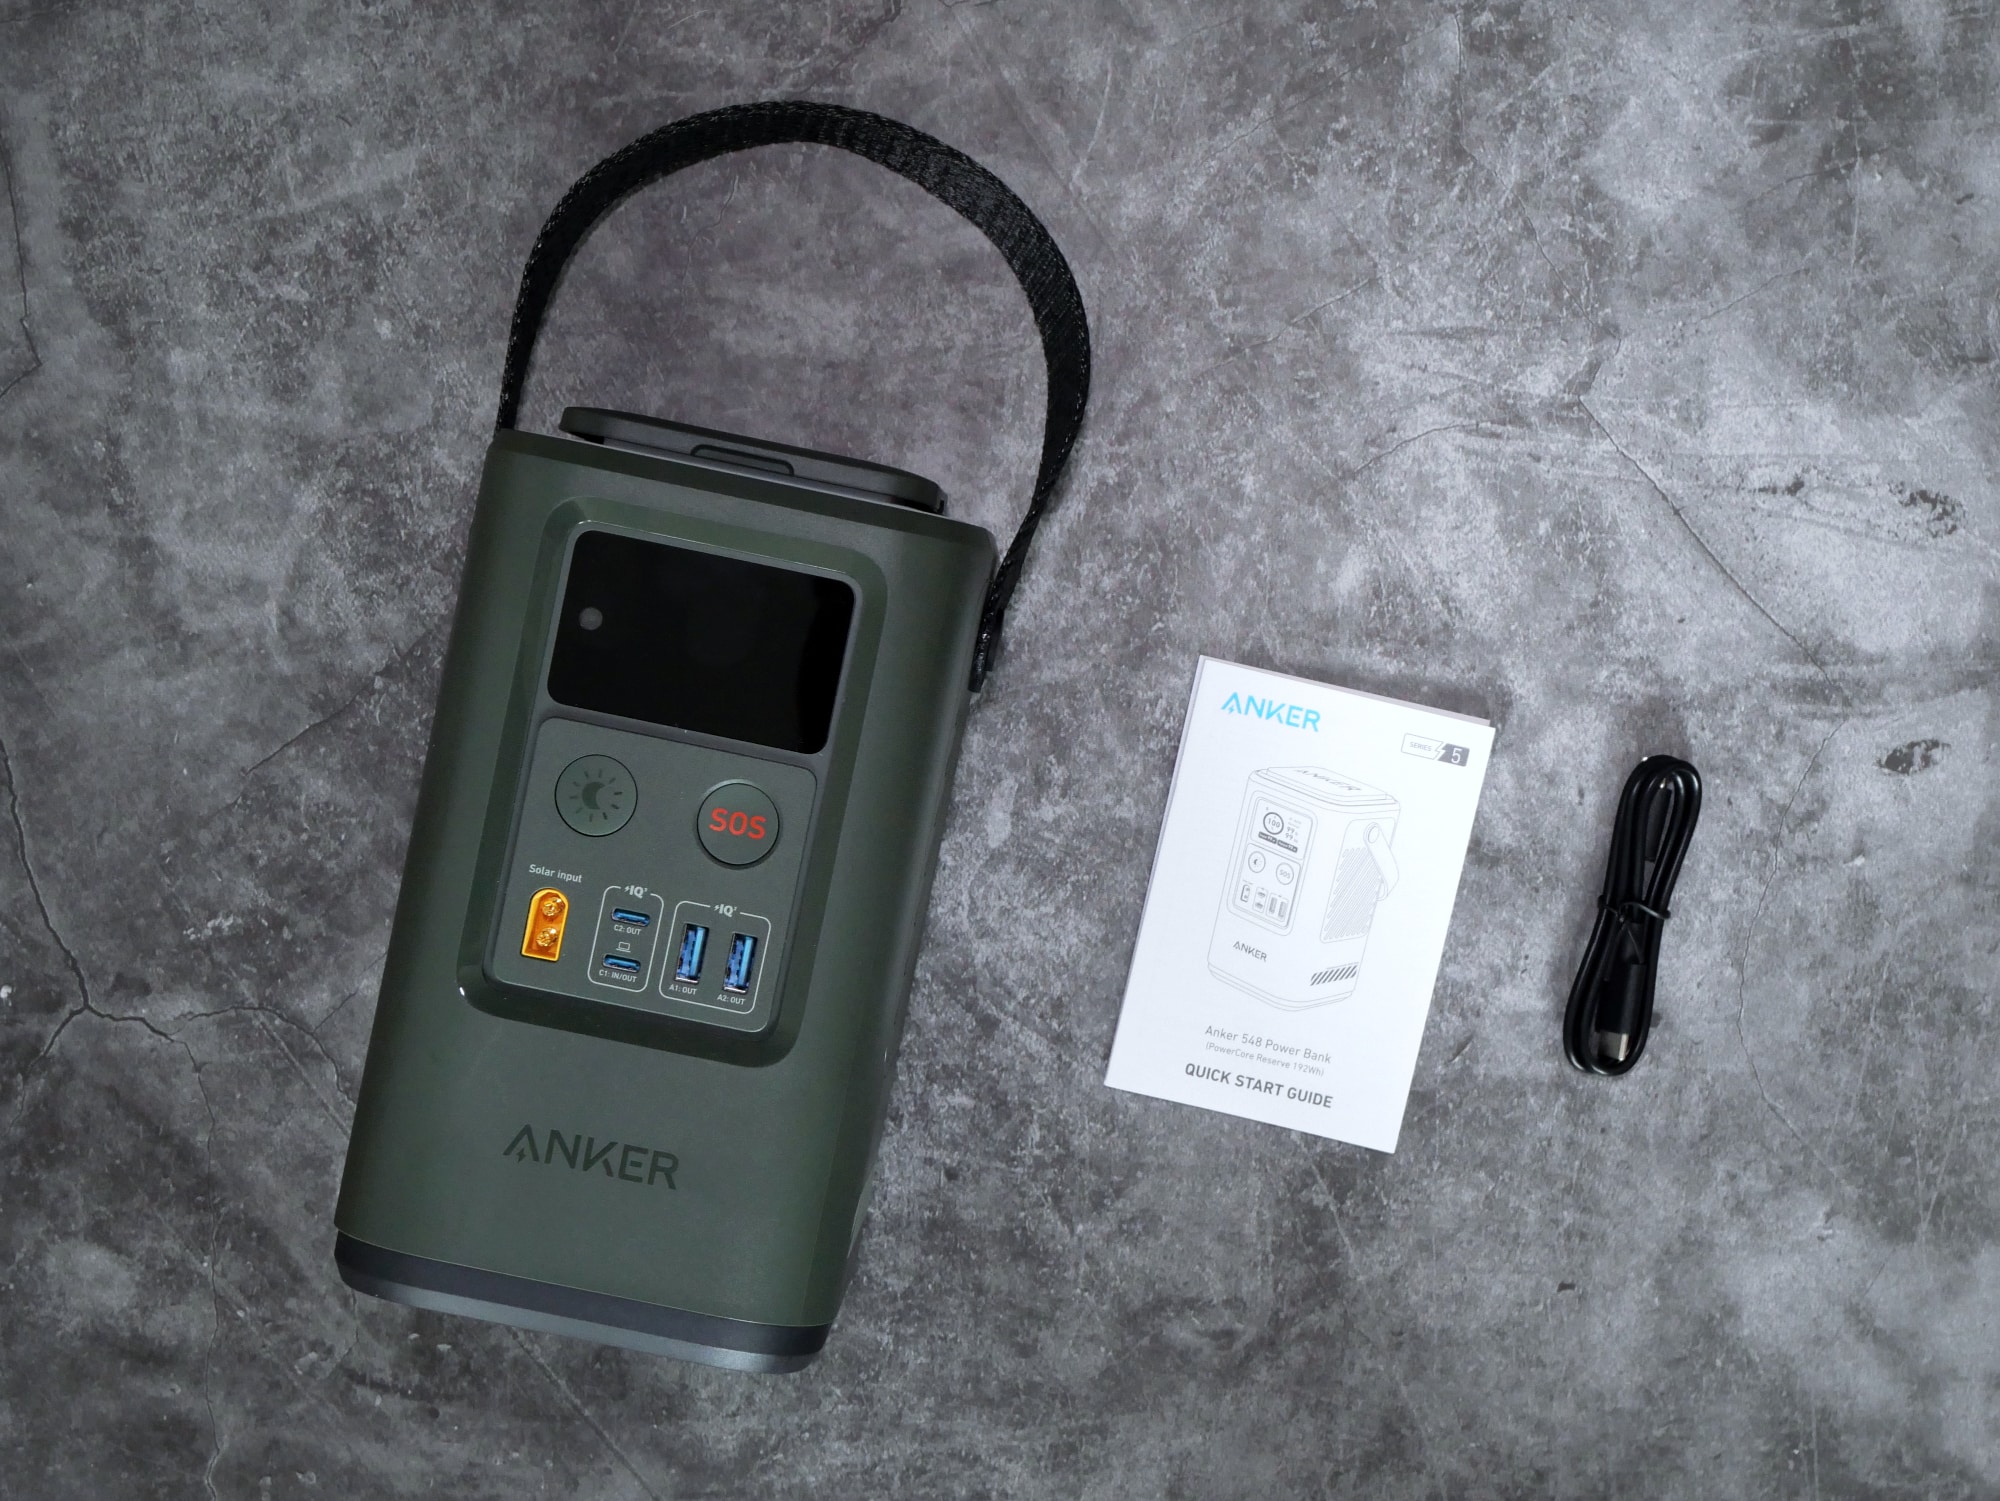 Anker 548 Powerbank Test - Outdoor powerbank with practical features